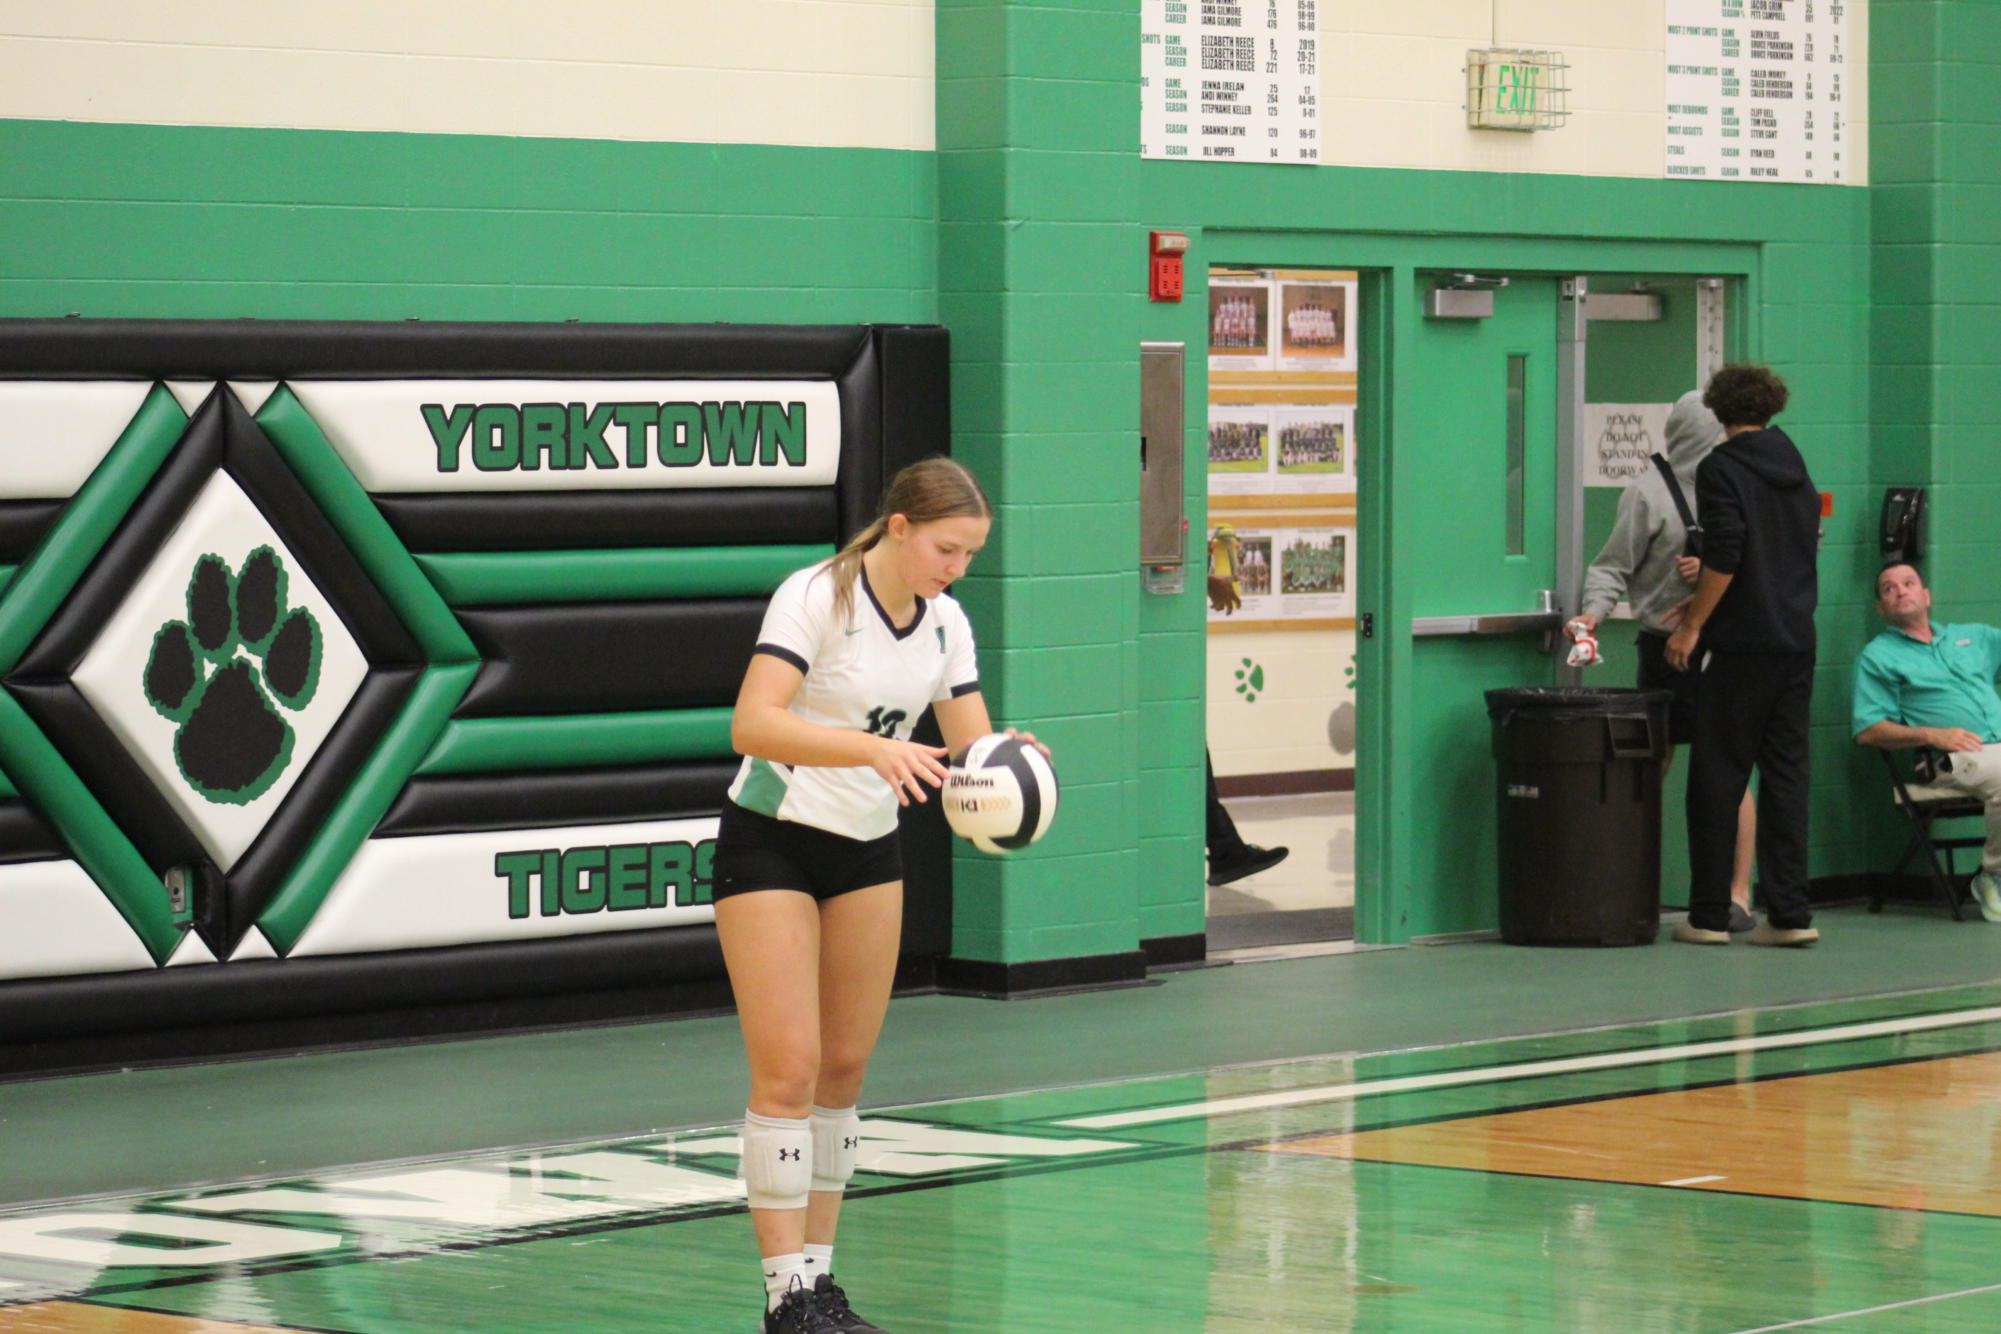 Varsity+Volleyball+Falls+to+Bellmont+and+Addi+Applegate+Reaches+1%2C000+Career+Digs